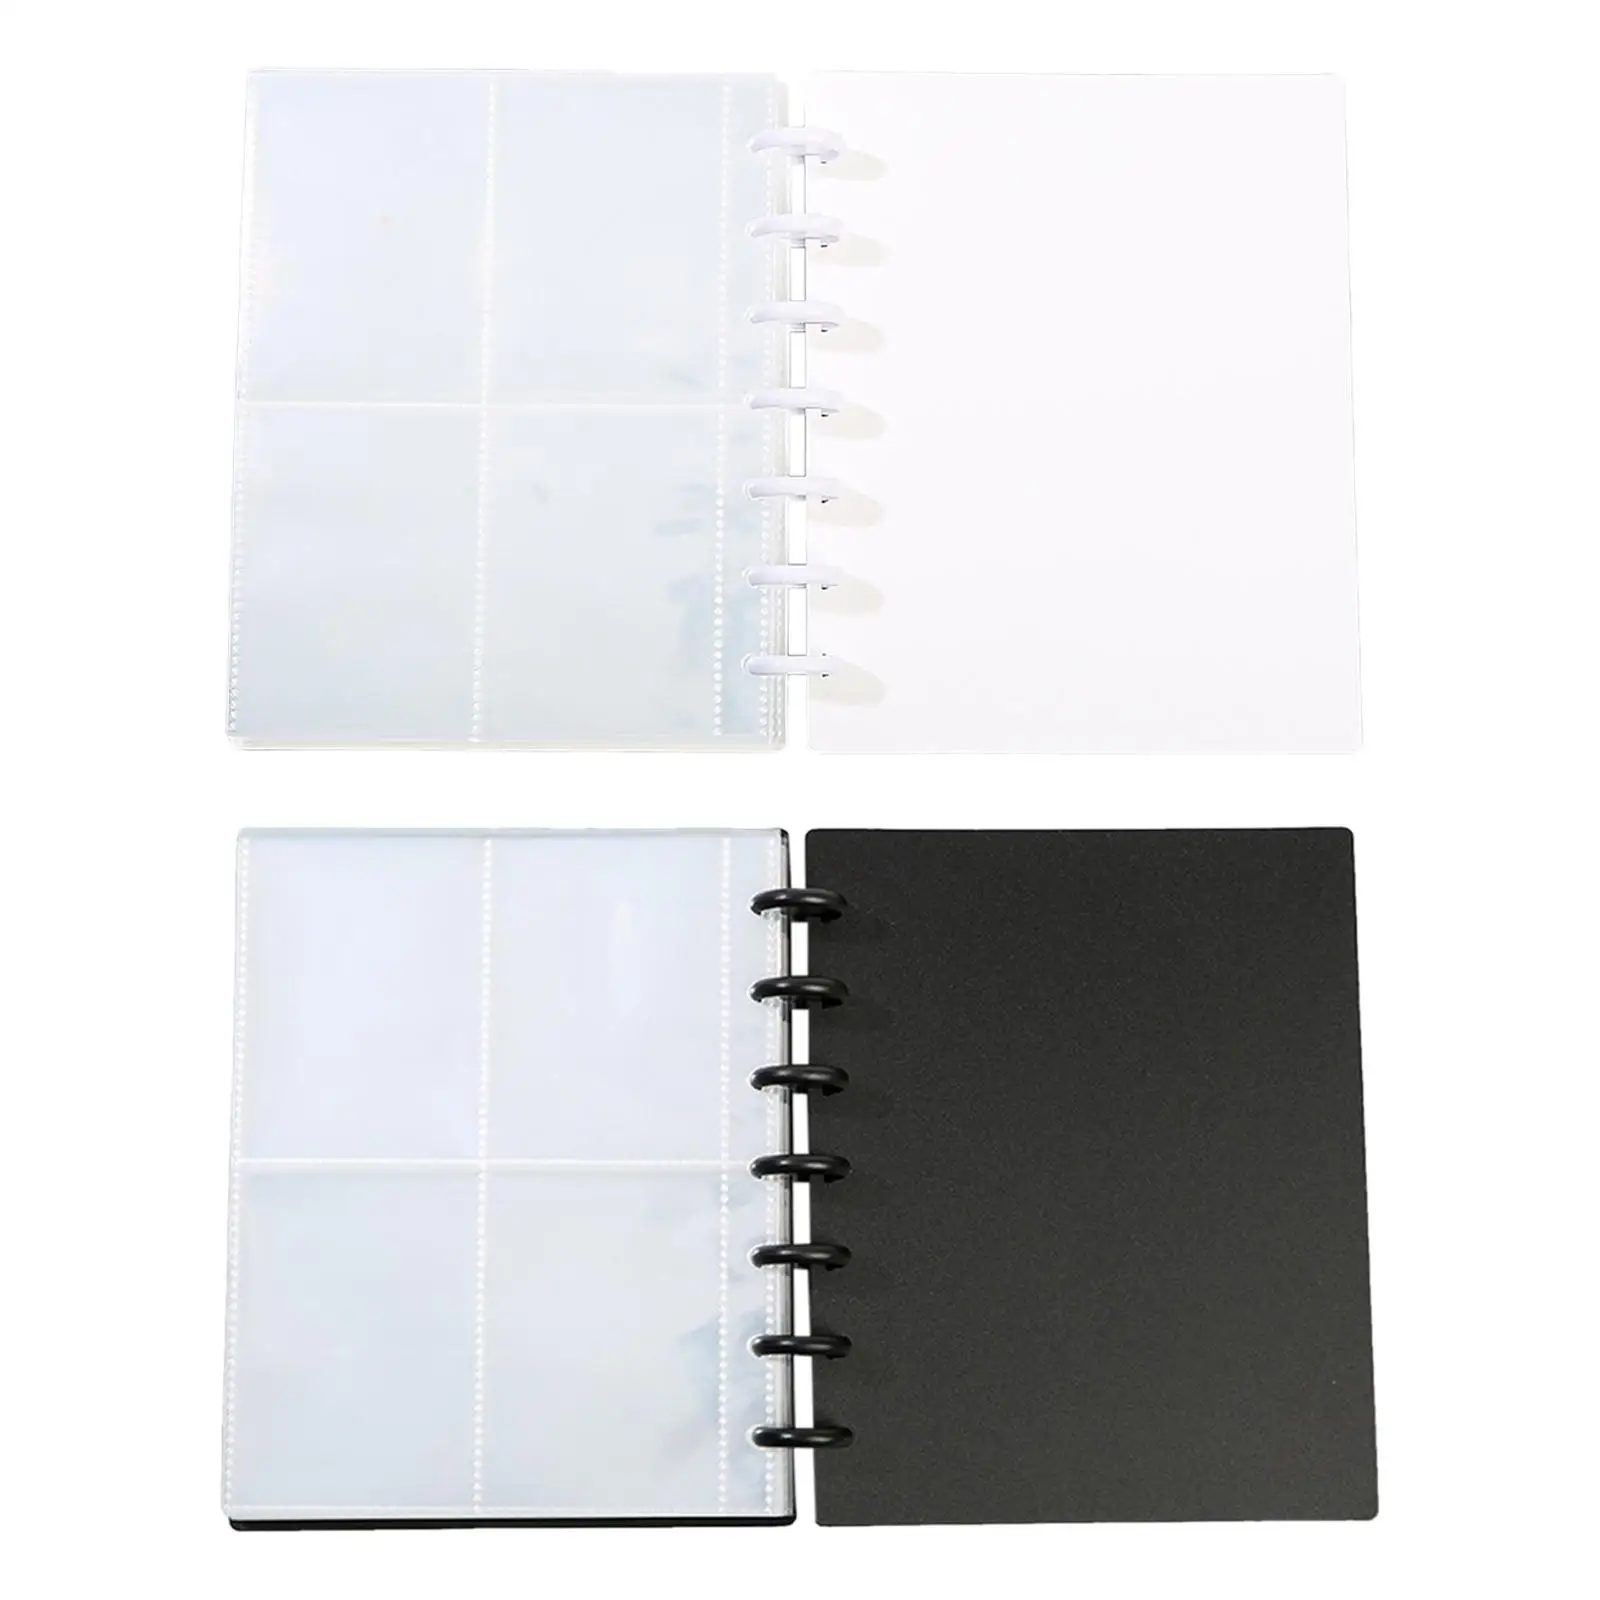 160 Pockets 2x3 Photo Album Refillable Notebook Instant Camera Book Photocard Sleeves Portable for Name Card Holder Storage